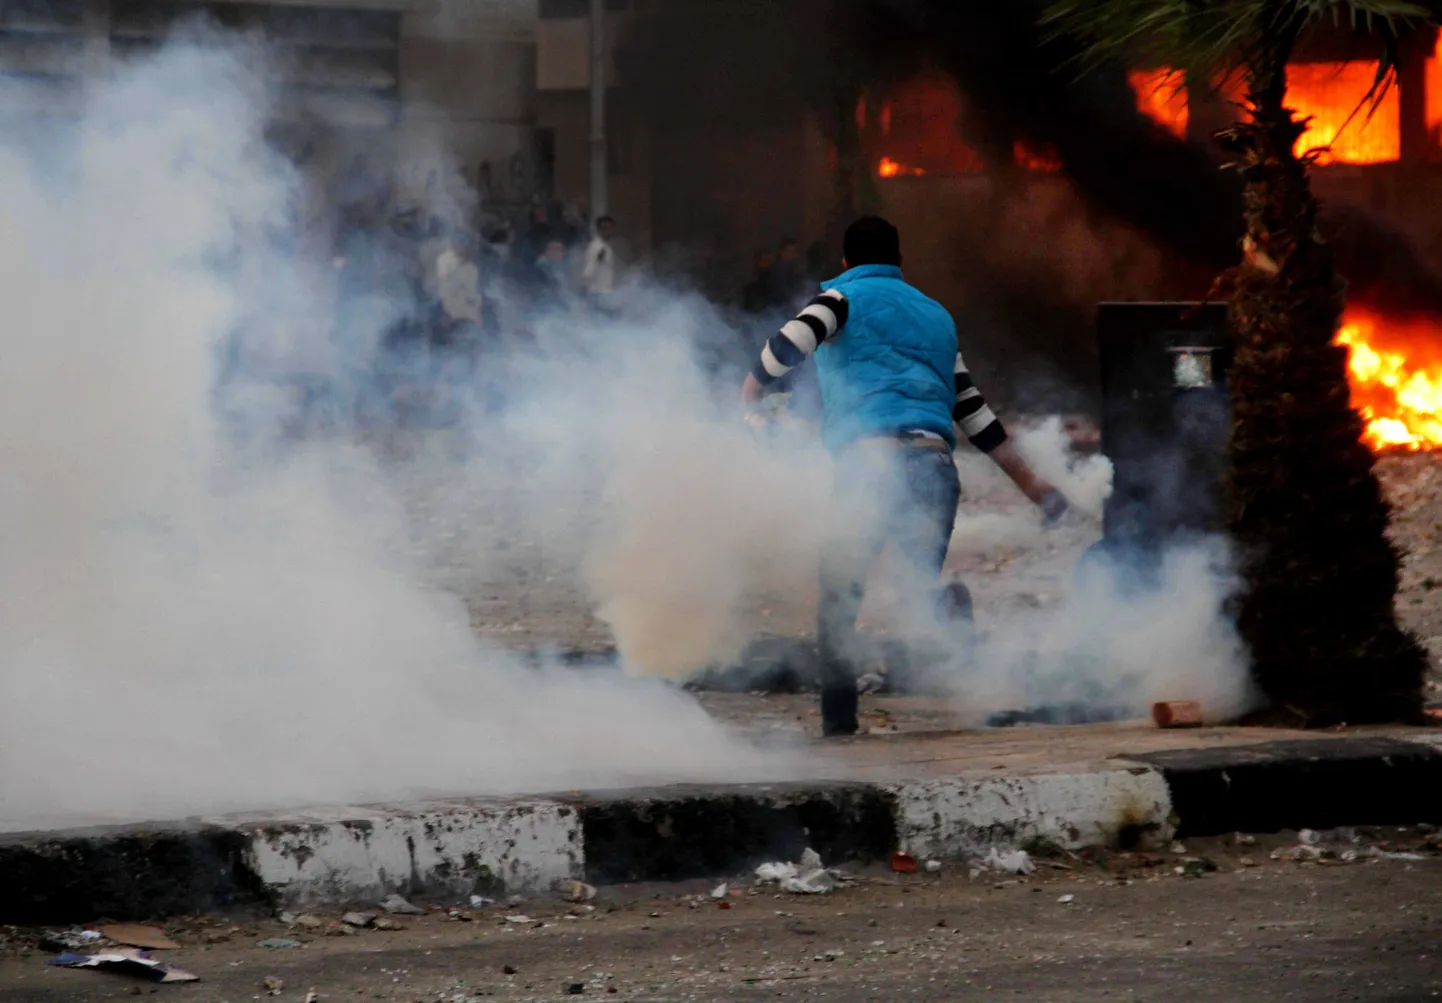 An Egyptian protester throws back a tear gas canister towards police, unseen, during clashes in Port Said, Egypt, Monday, March 4, 2013. Violence between police and protesters restarted Monday in the restive Suez Canal city of Port Said, as forces lobbed tear gas and birdshots at protesters who throw firebombs at a government complex, setting parts of it on fire. (AP Photo/Ahmed Ramadan) / SCANPIX Code: 436